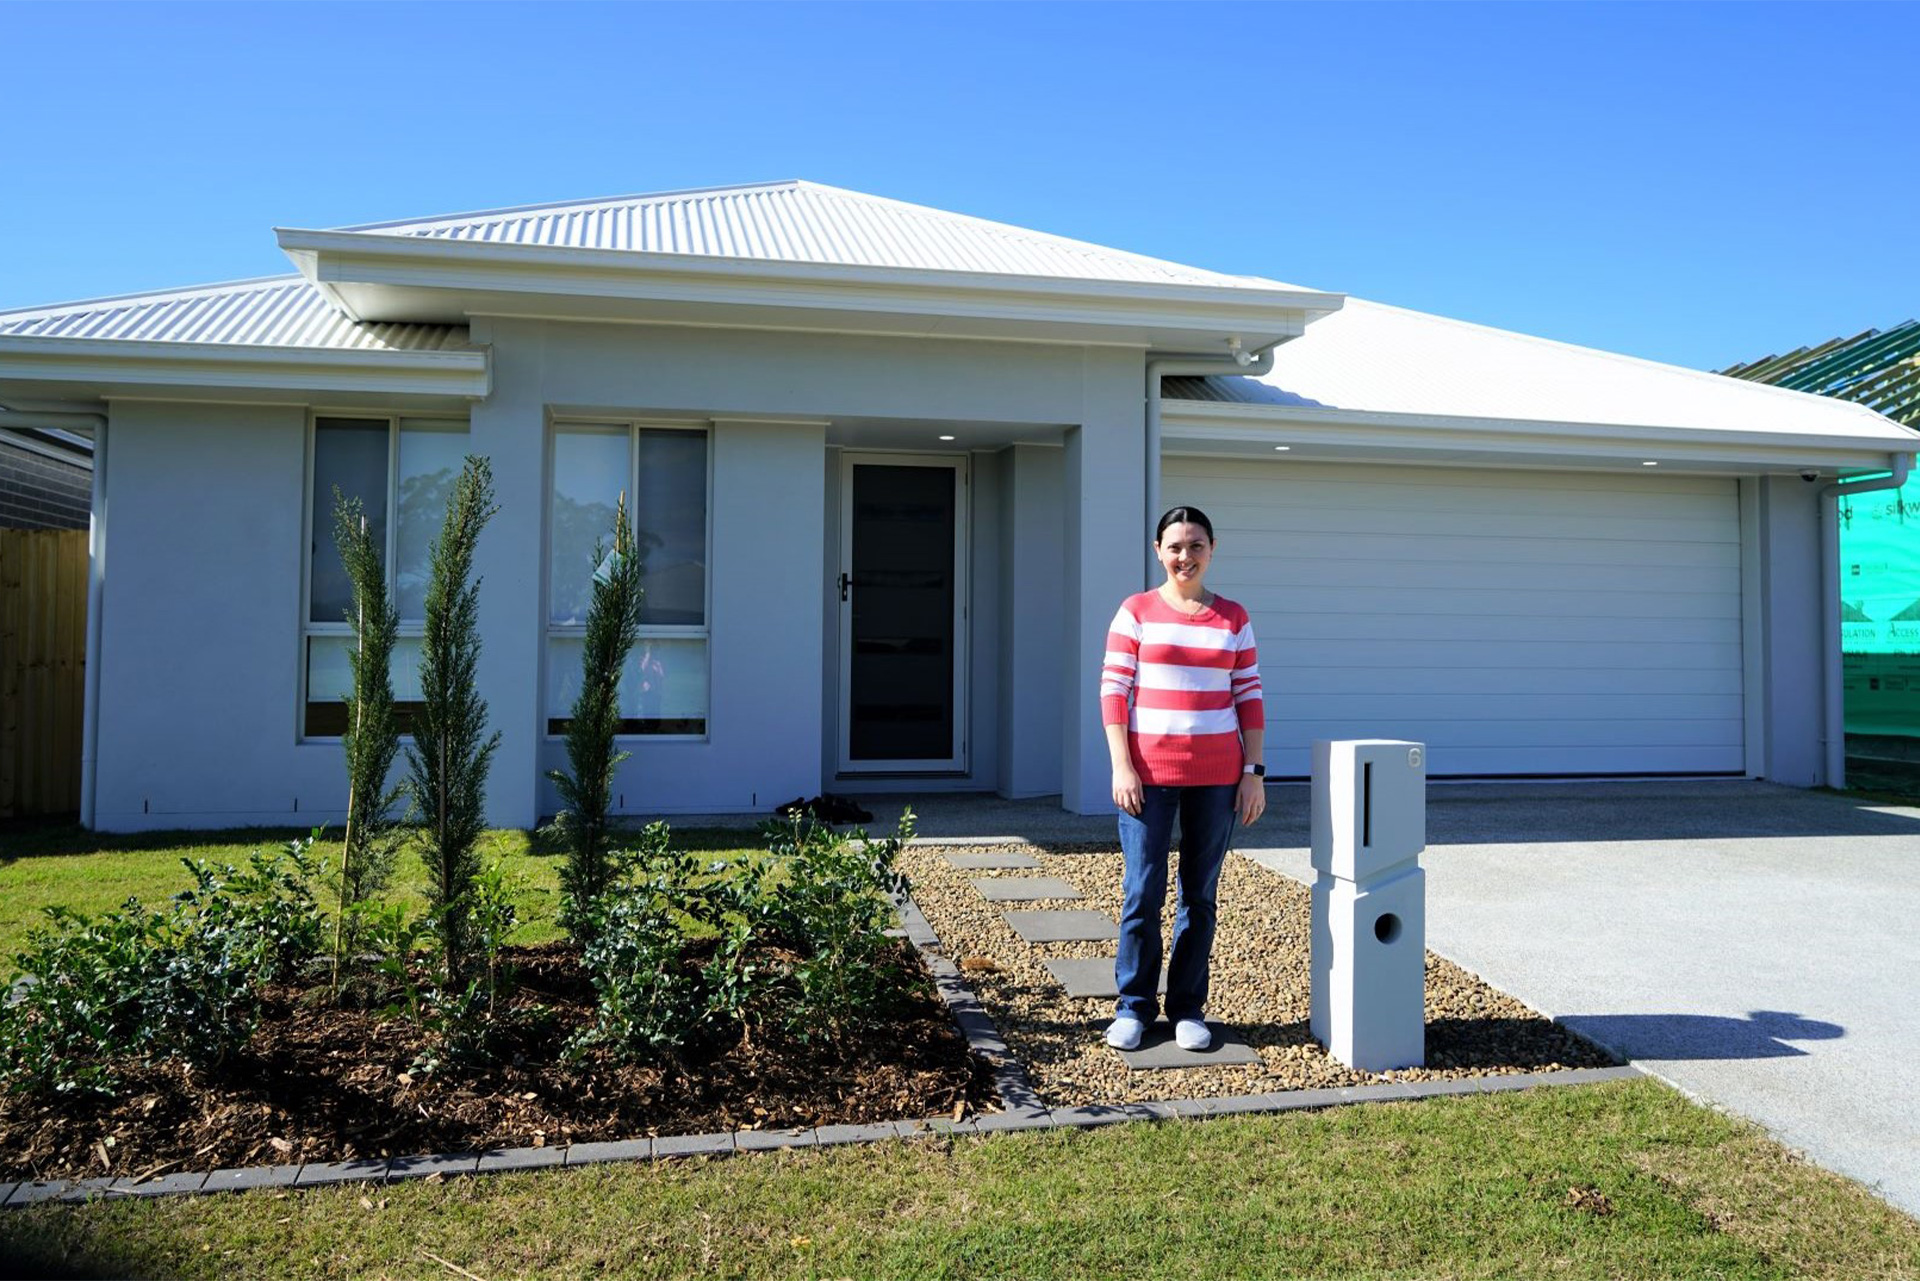 Make the Most of The First Home Buyers Grant in NSW - No1 Property Guide